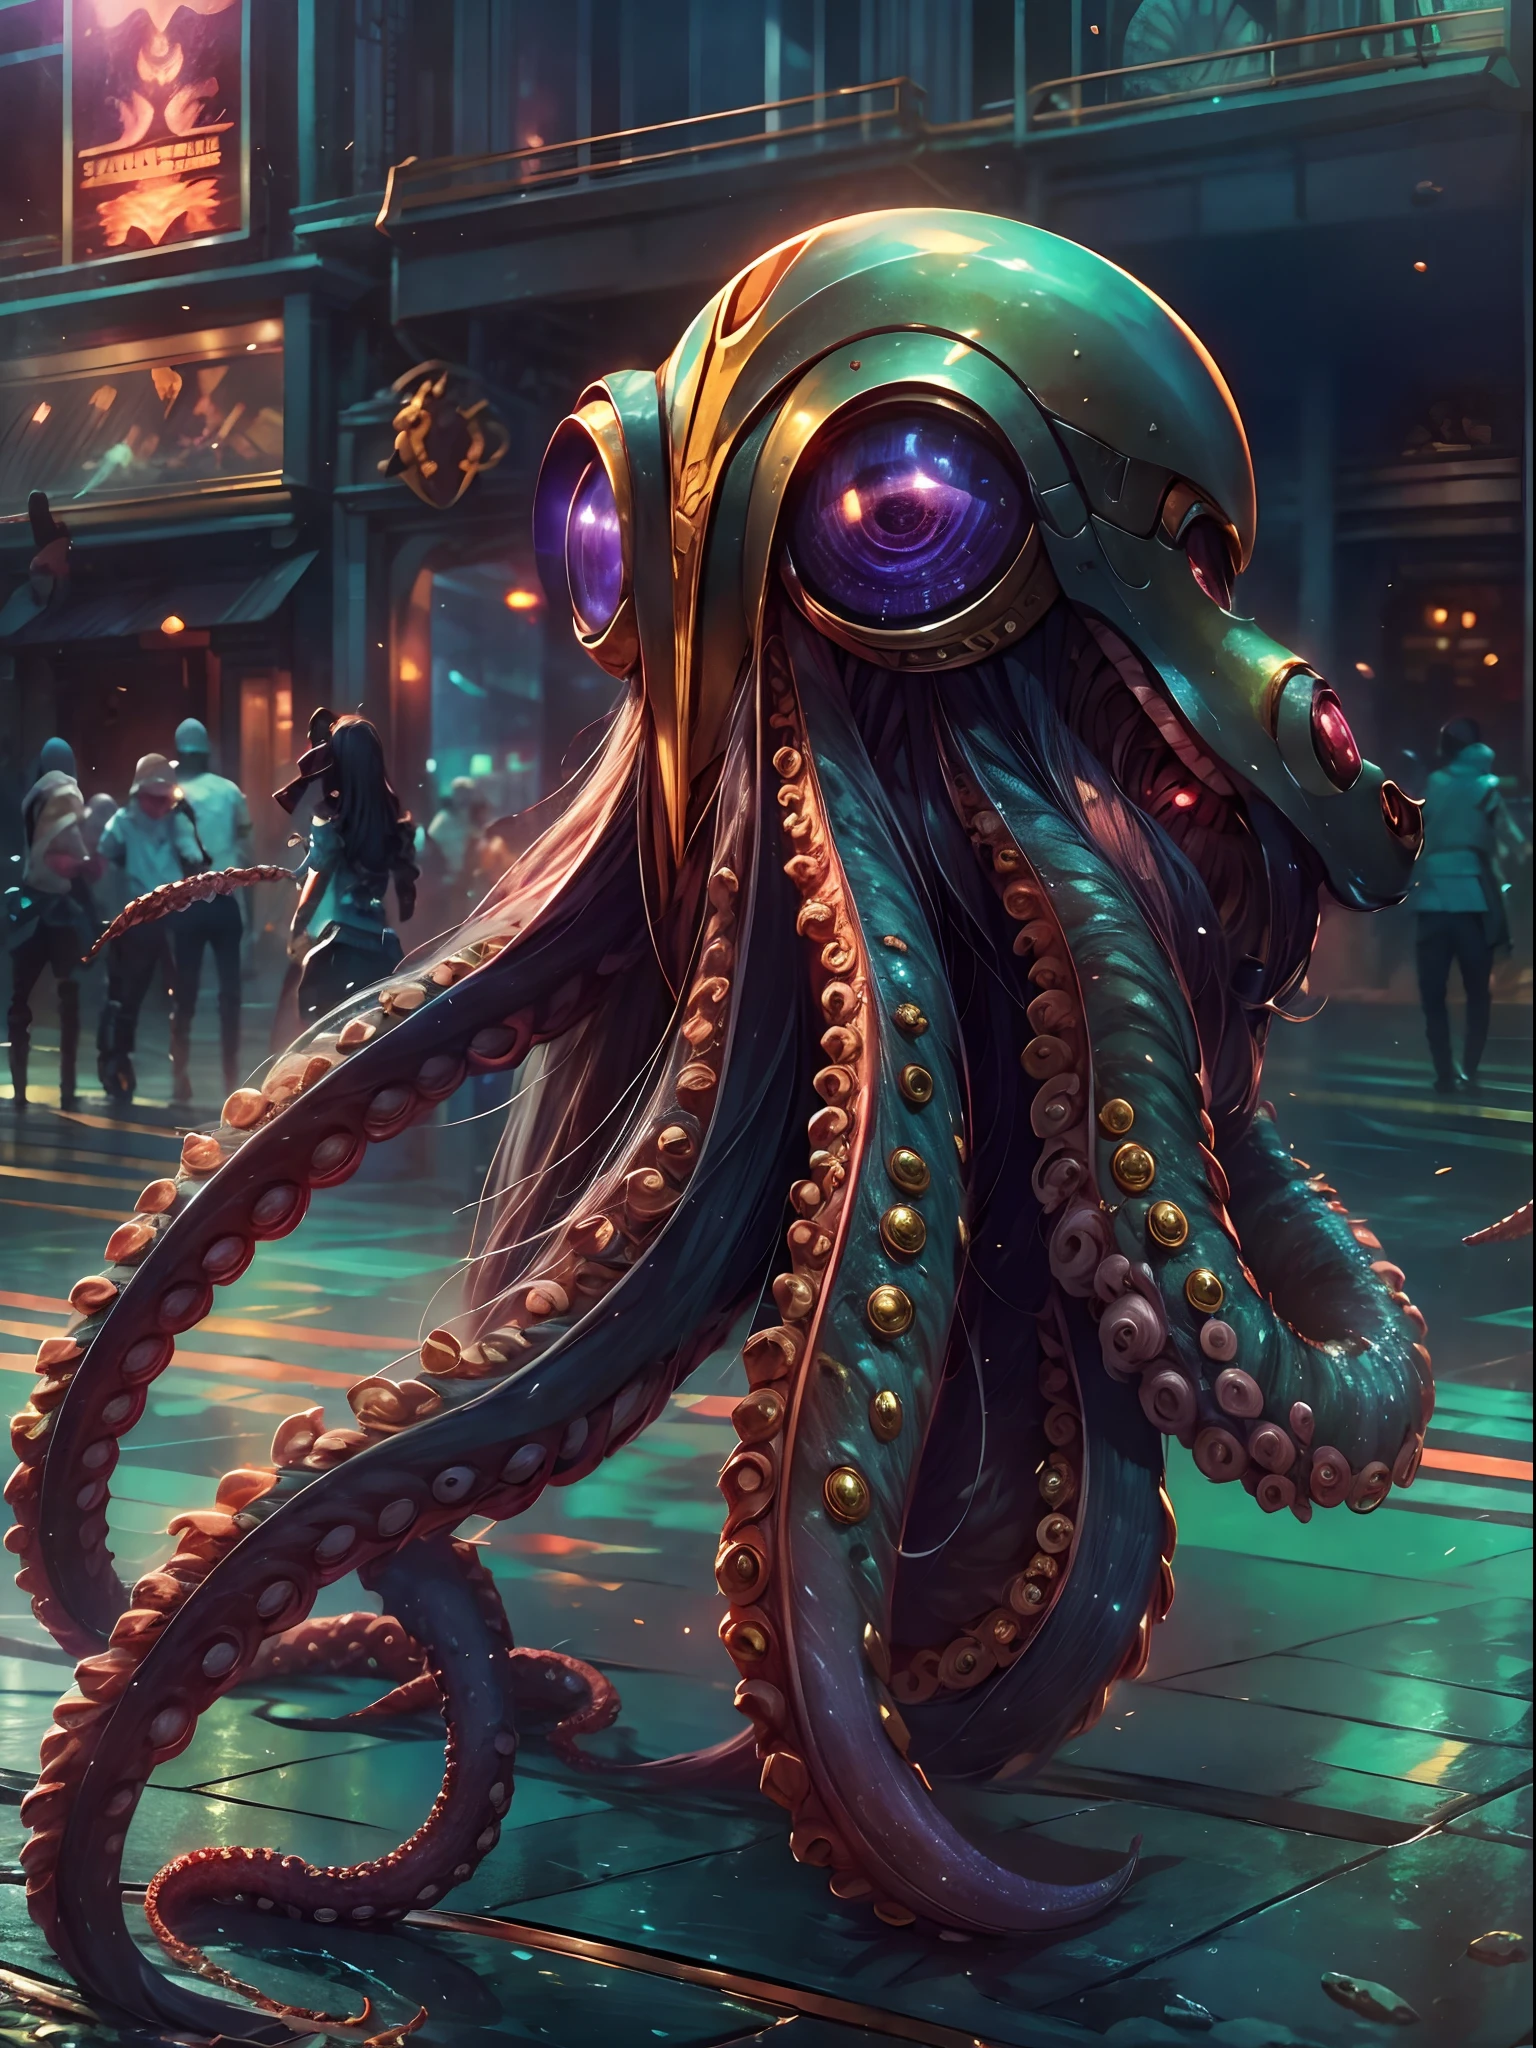 There is a giant octopus that is standing on the street - SeaArt AI